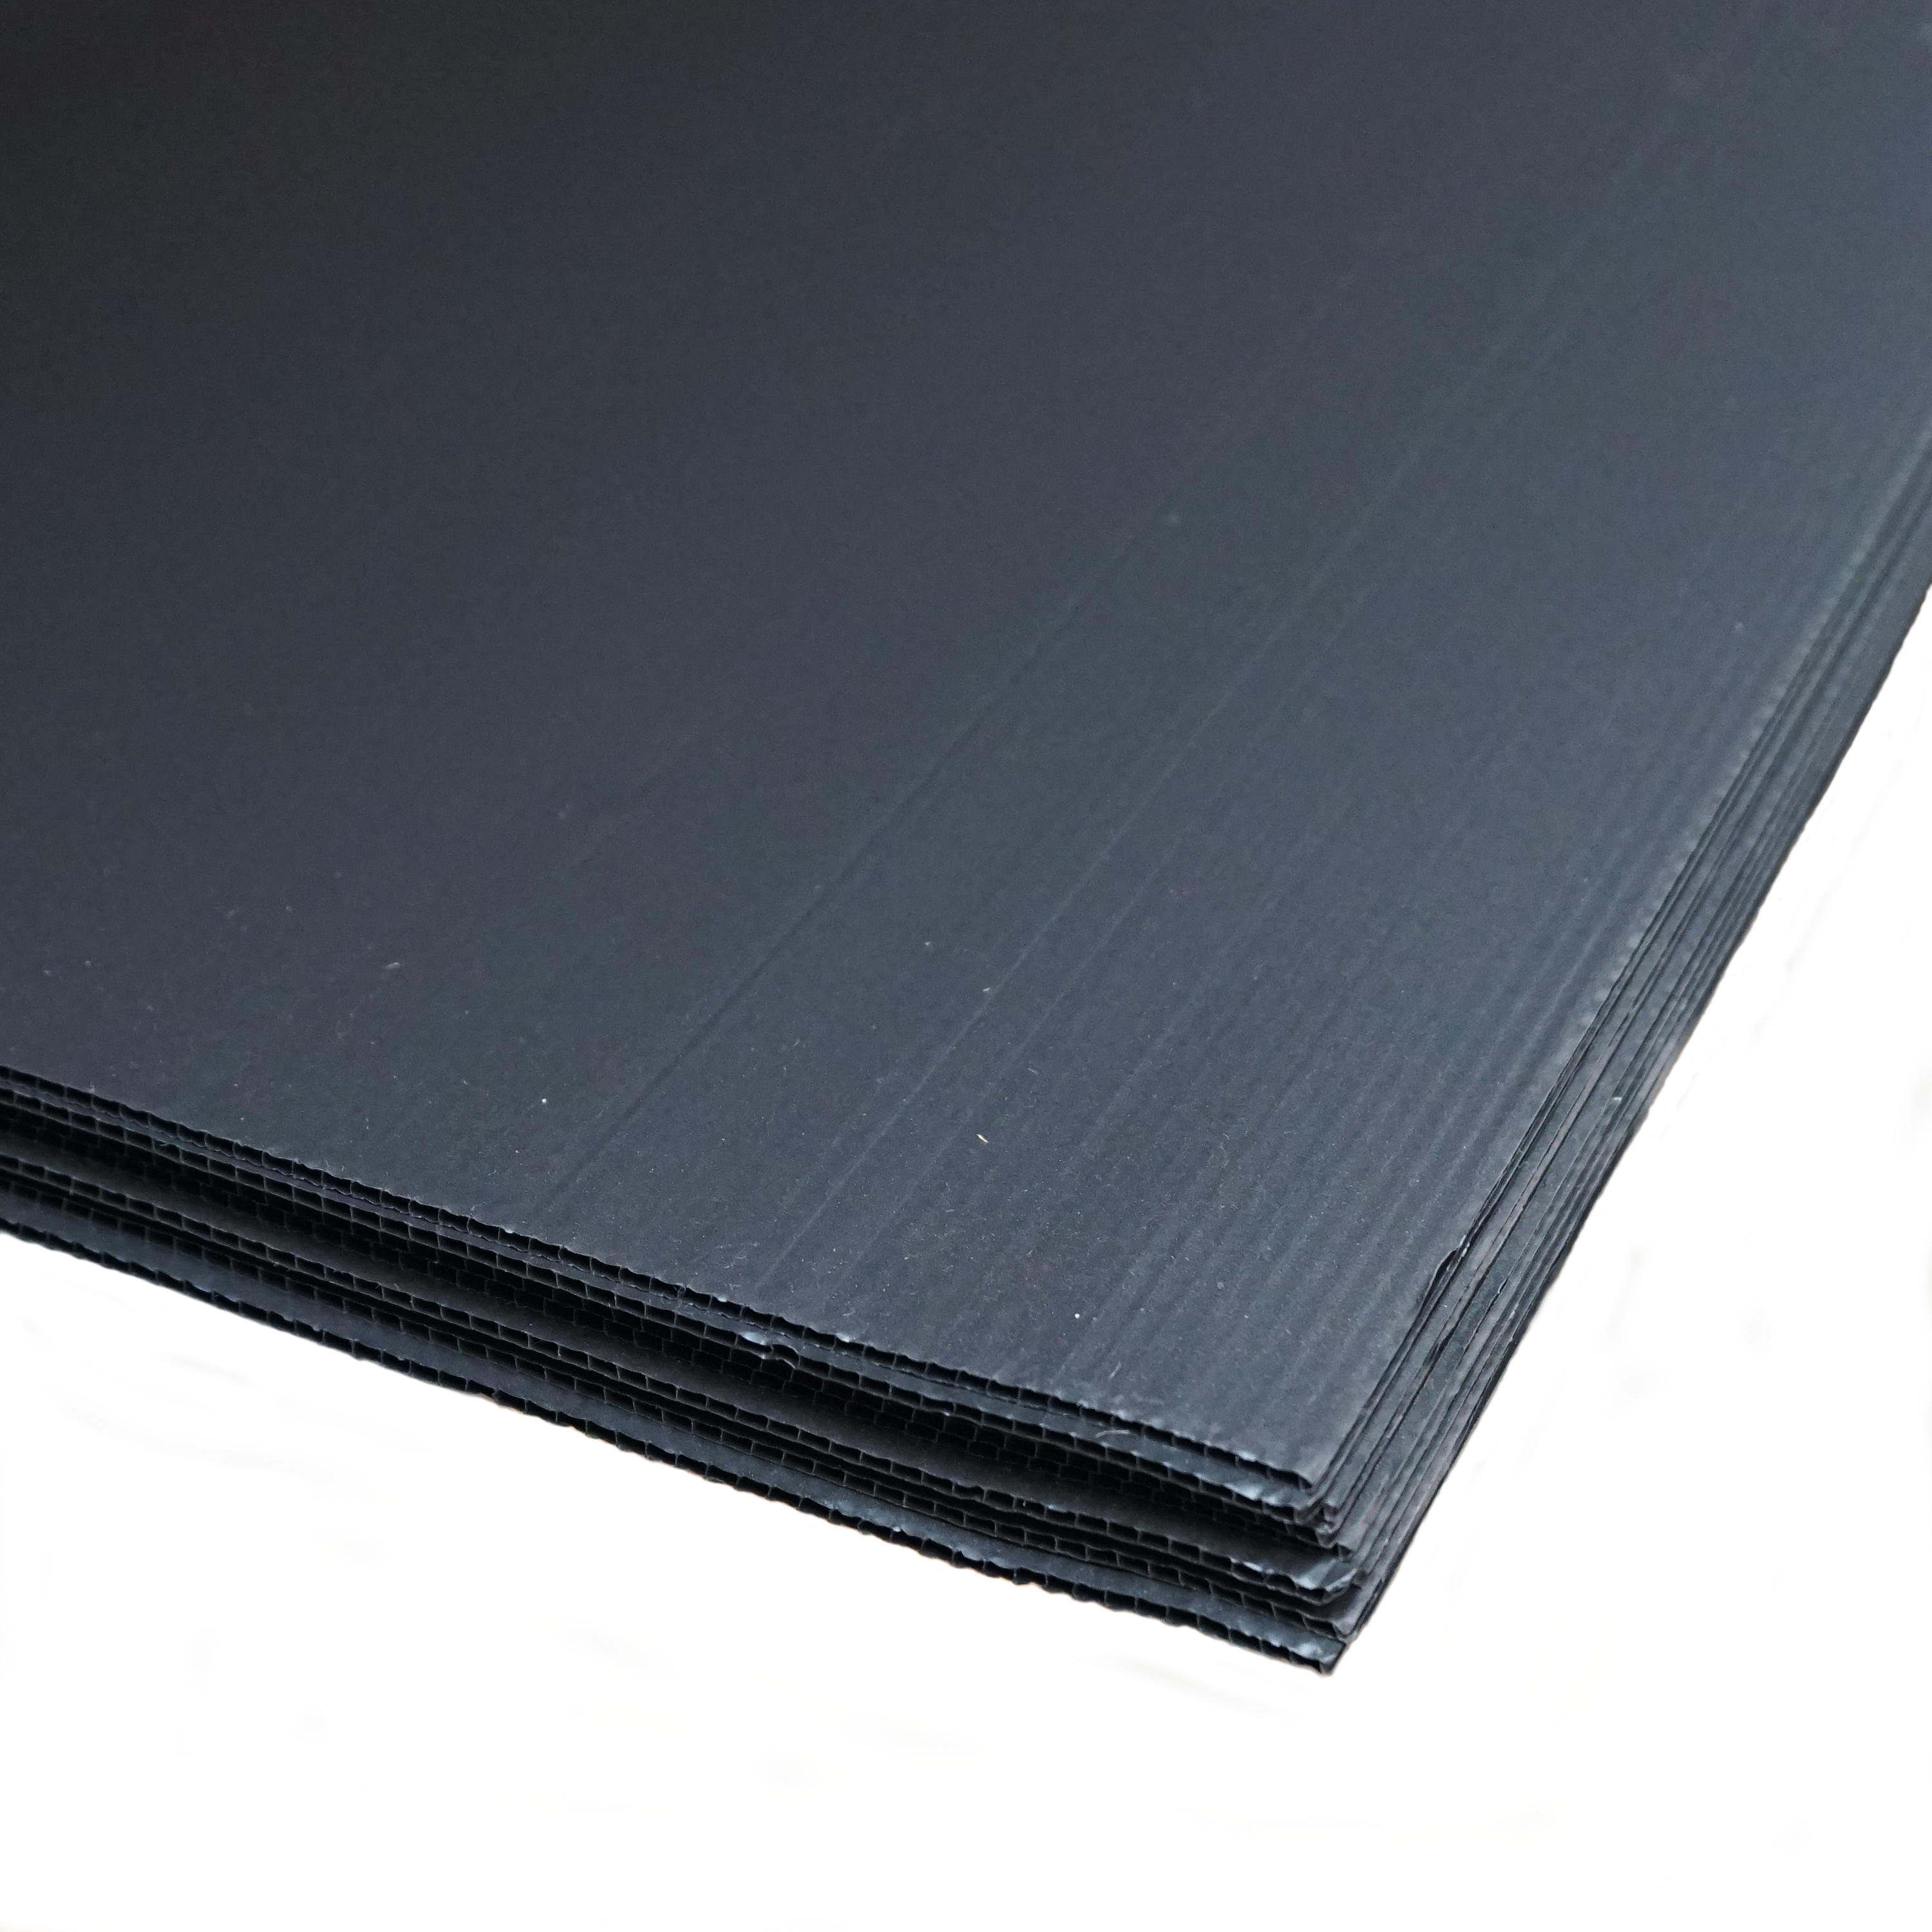 2.4m x 1.2m 2mm/250gsm Black Recycled Protection Board - Single Sheet